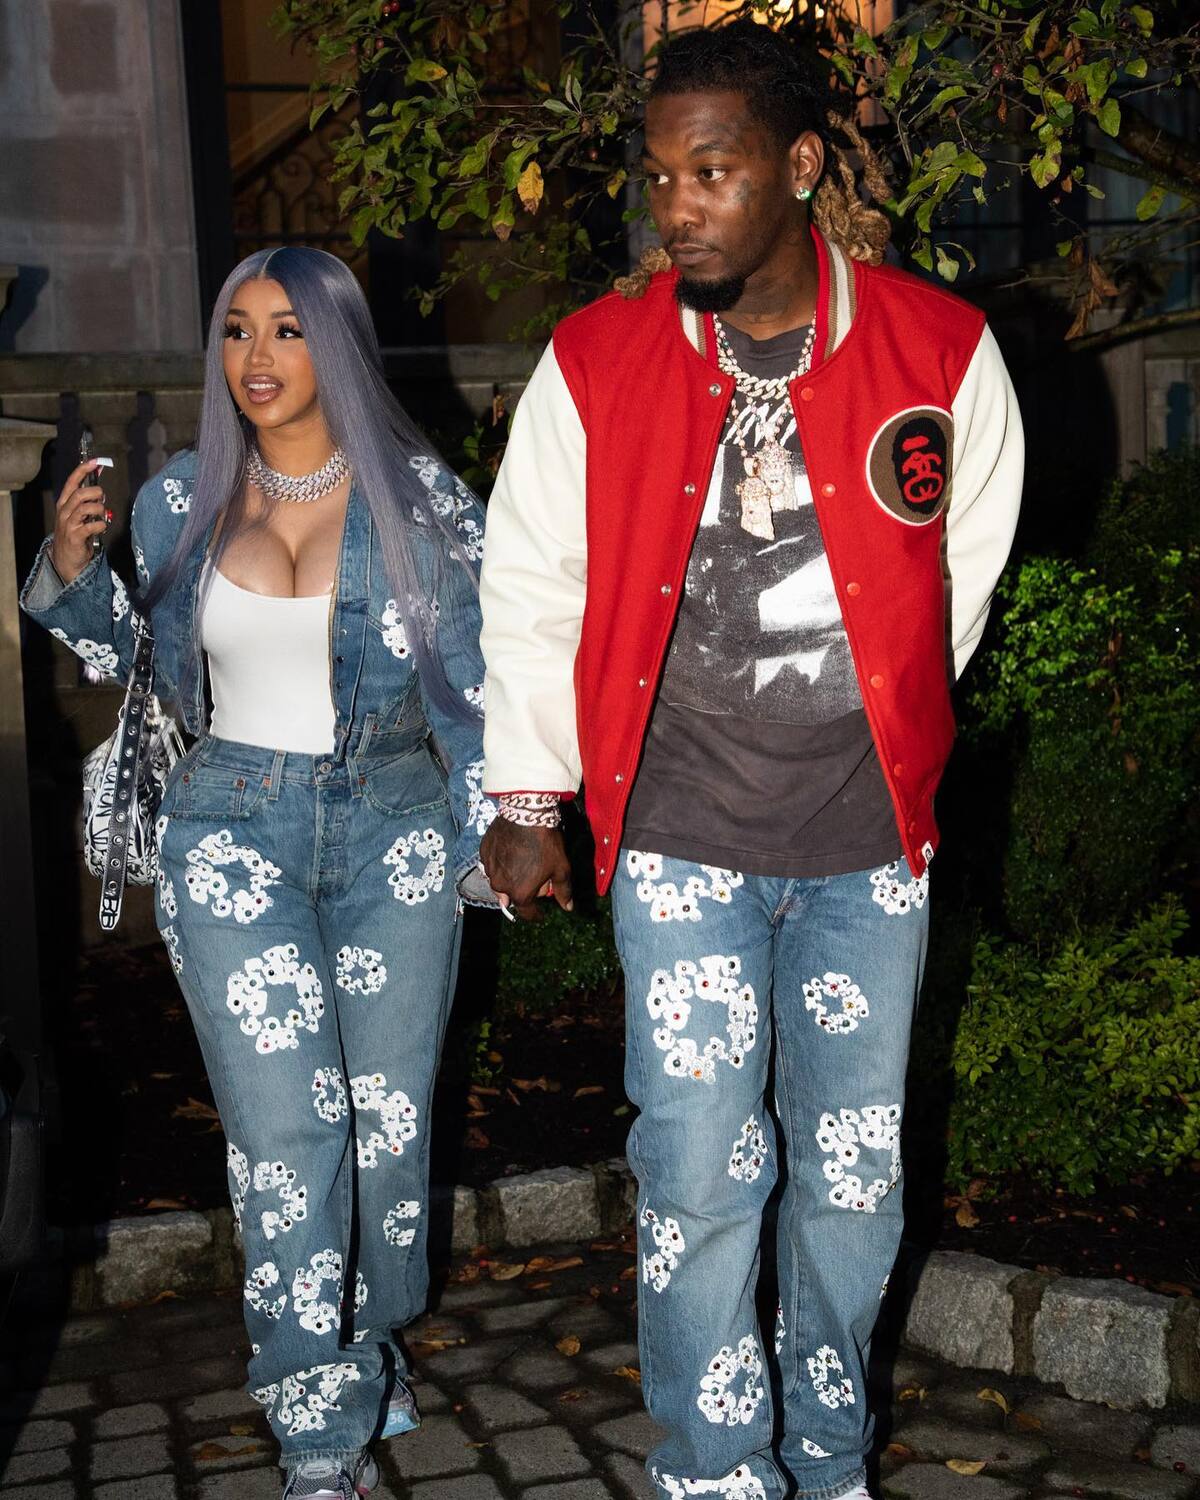 SPOTTED: Cardi B & Offset Pose for a Family Flick in Full Denim